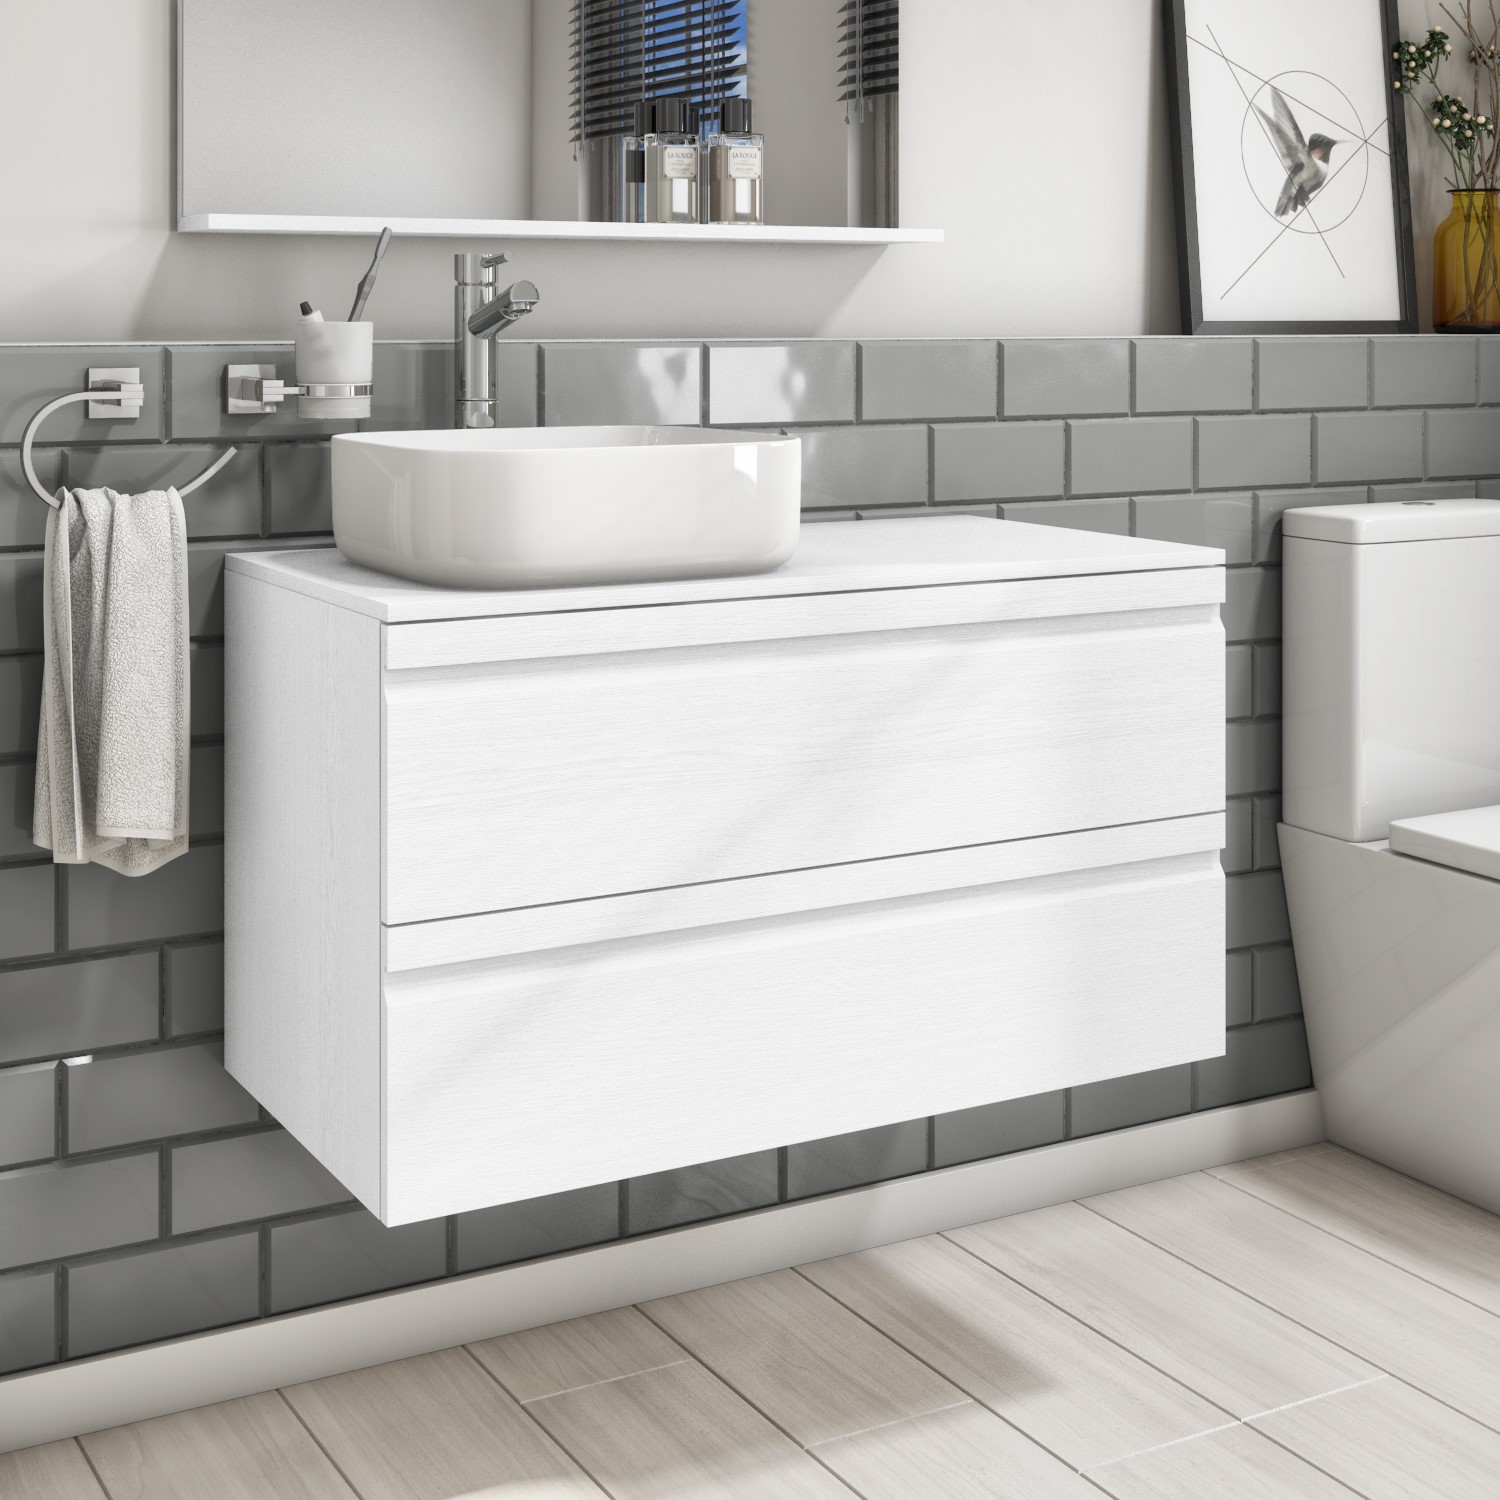 900mm White Wood Effect Wall Hung Countertop Vanity Unit with Basin - Boston